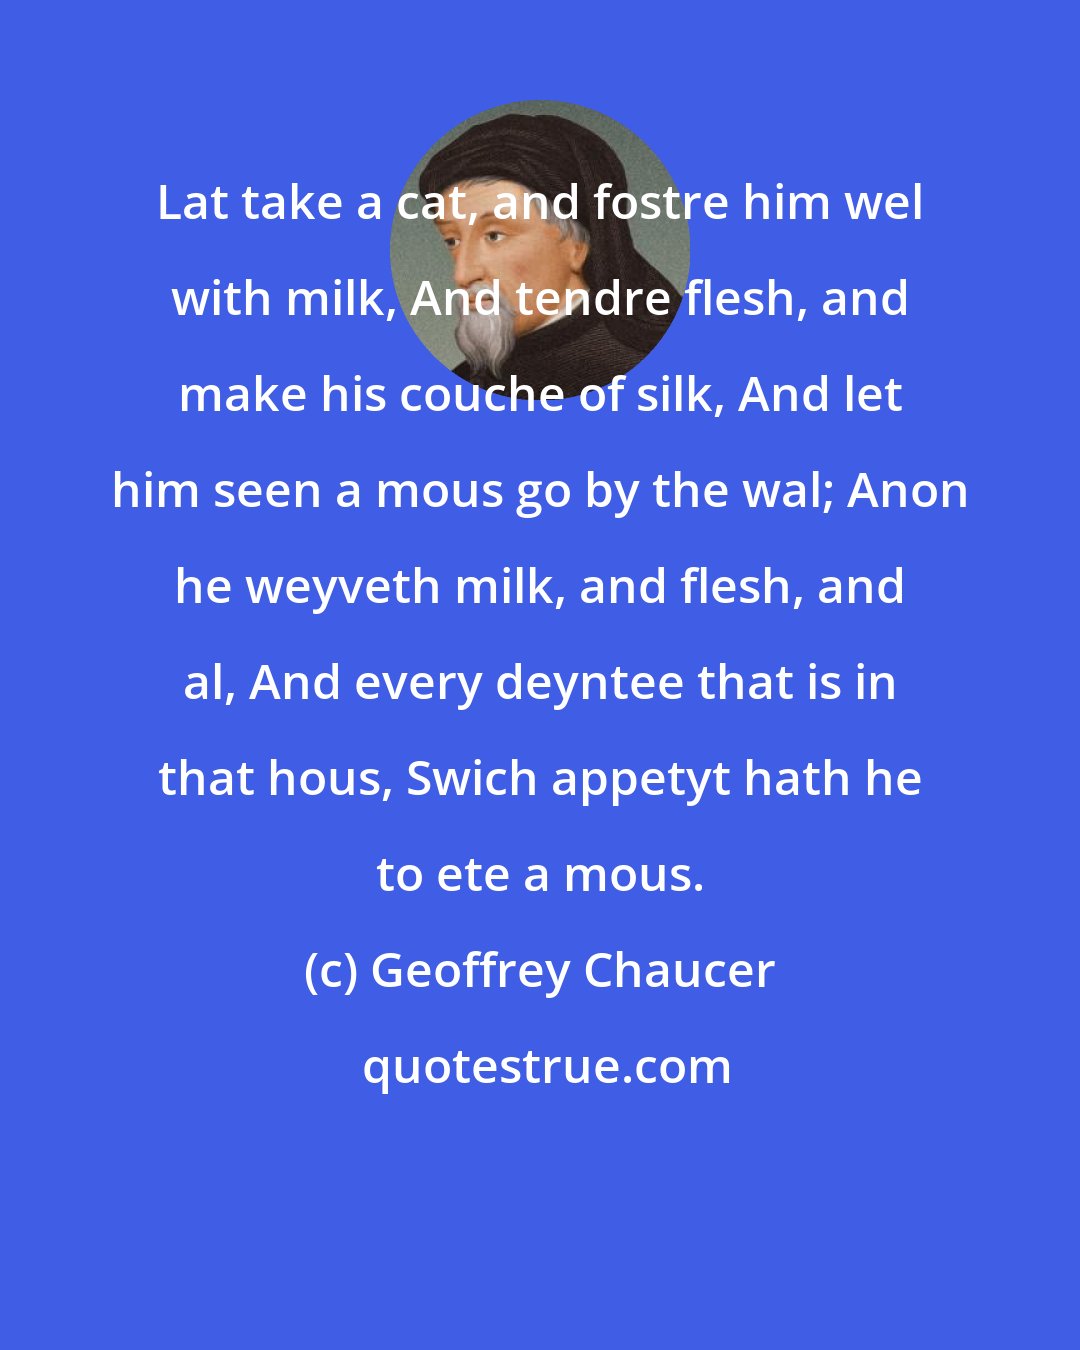 Geoffrey Chaucer: Lat take a cat, and fostre him wel with milk, And tendre flesh, and make his couche of silk, And let him seen a mous go by the wal; Anon he weyveth milk, and flesh, and al, And every deyntee that is in that hous, Swich appetyt hath he to ete a mous.